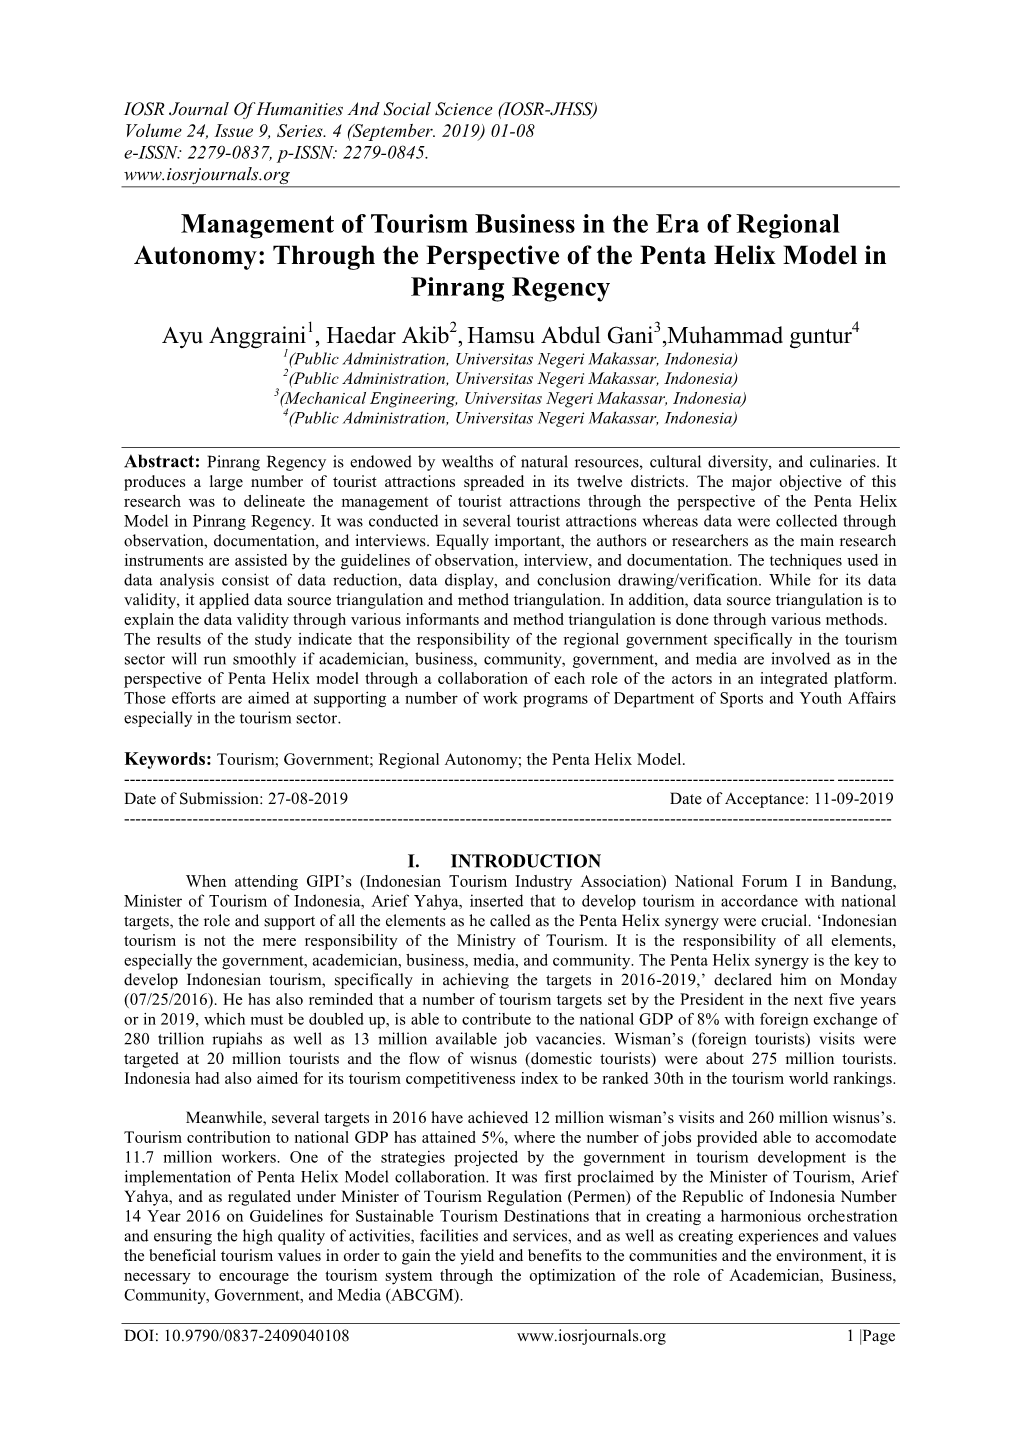 Management of Tourism Business in the Era of Regional Autonomy: Through the Perspective of the Penta Helix Model in Pinrang Regency